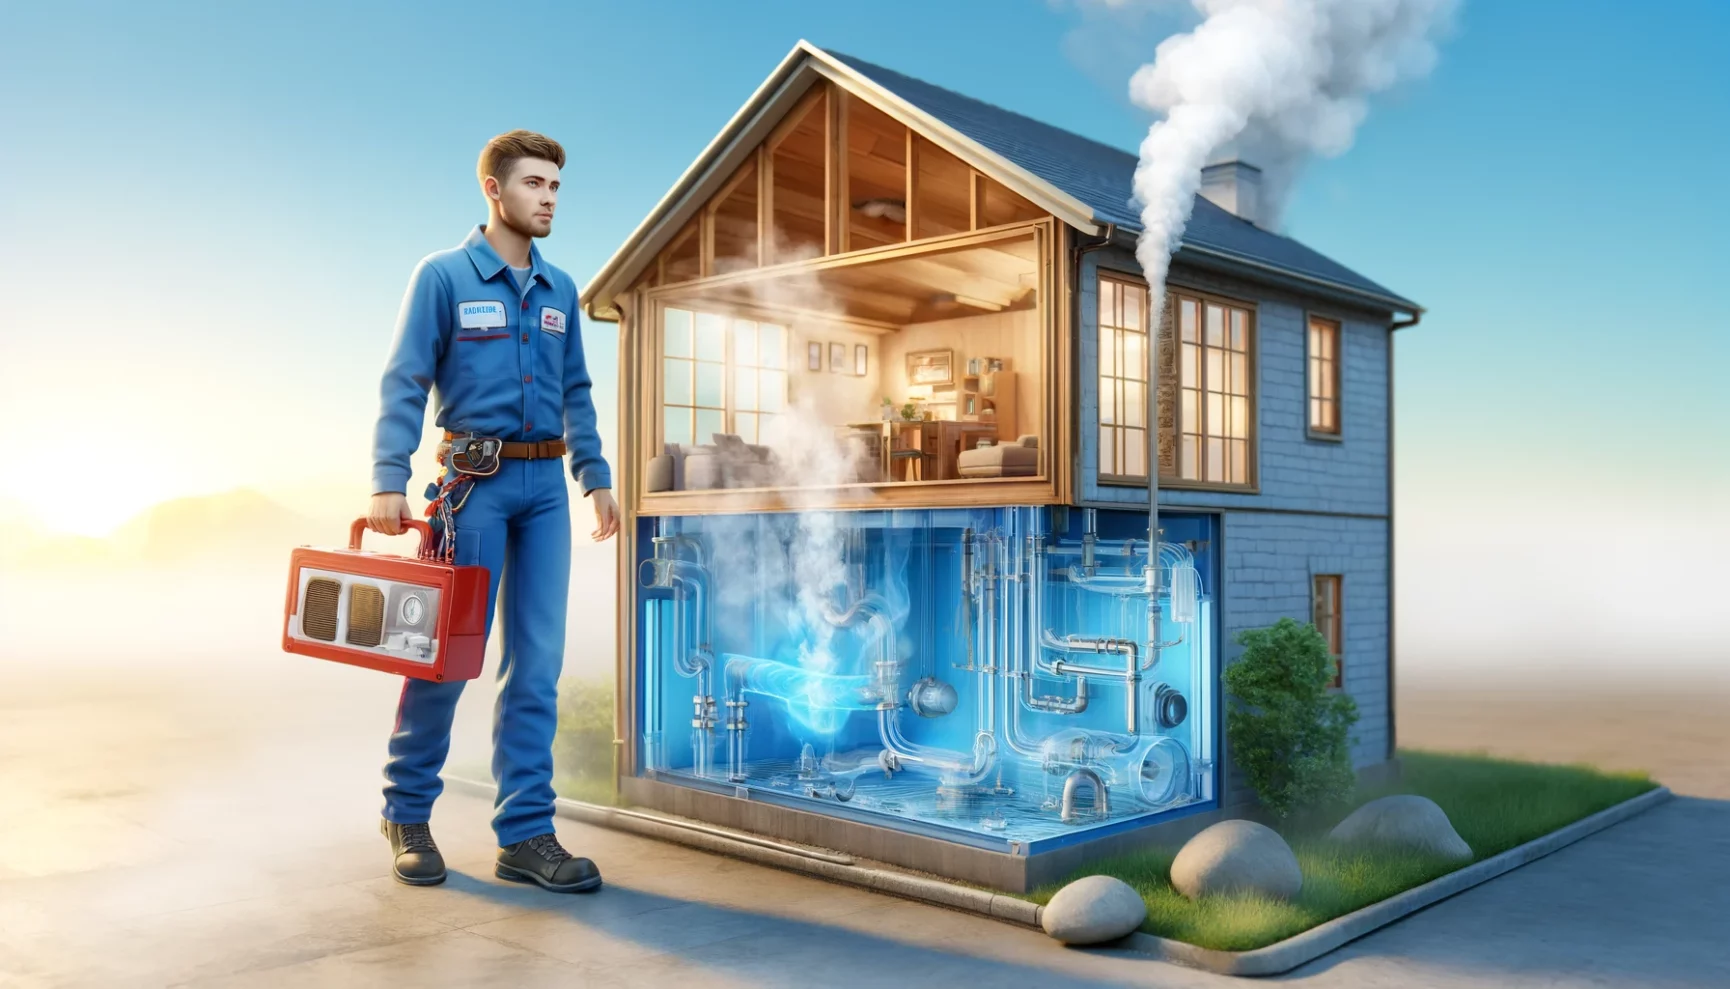 A technician with a toolbox beside a transparent cutaway illustration of a house with visible plumbing and heating systems.